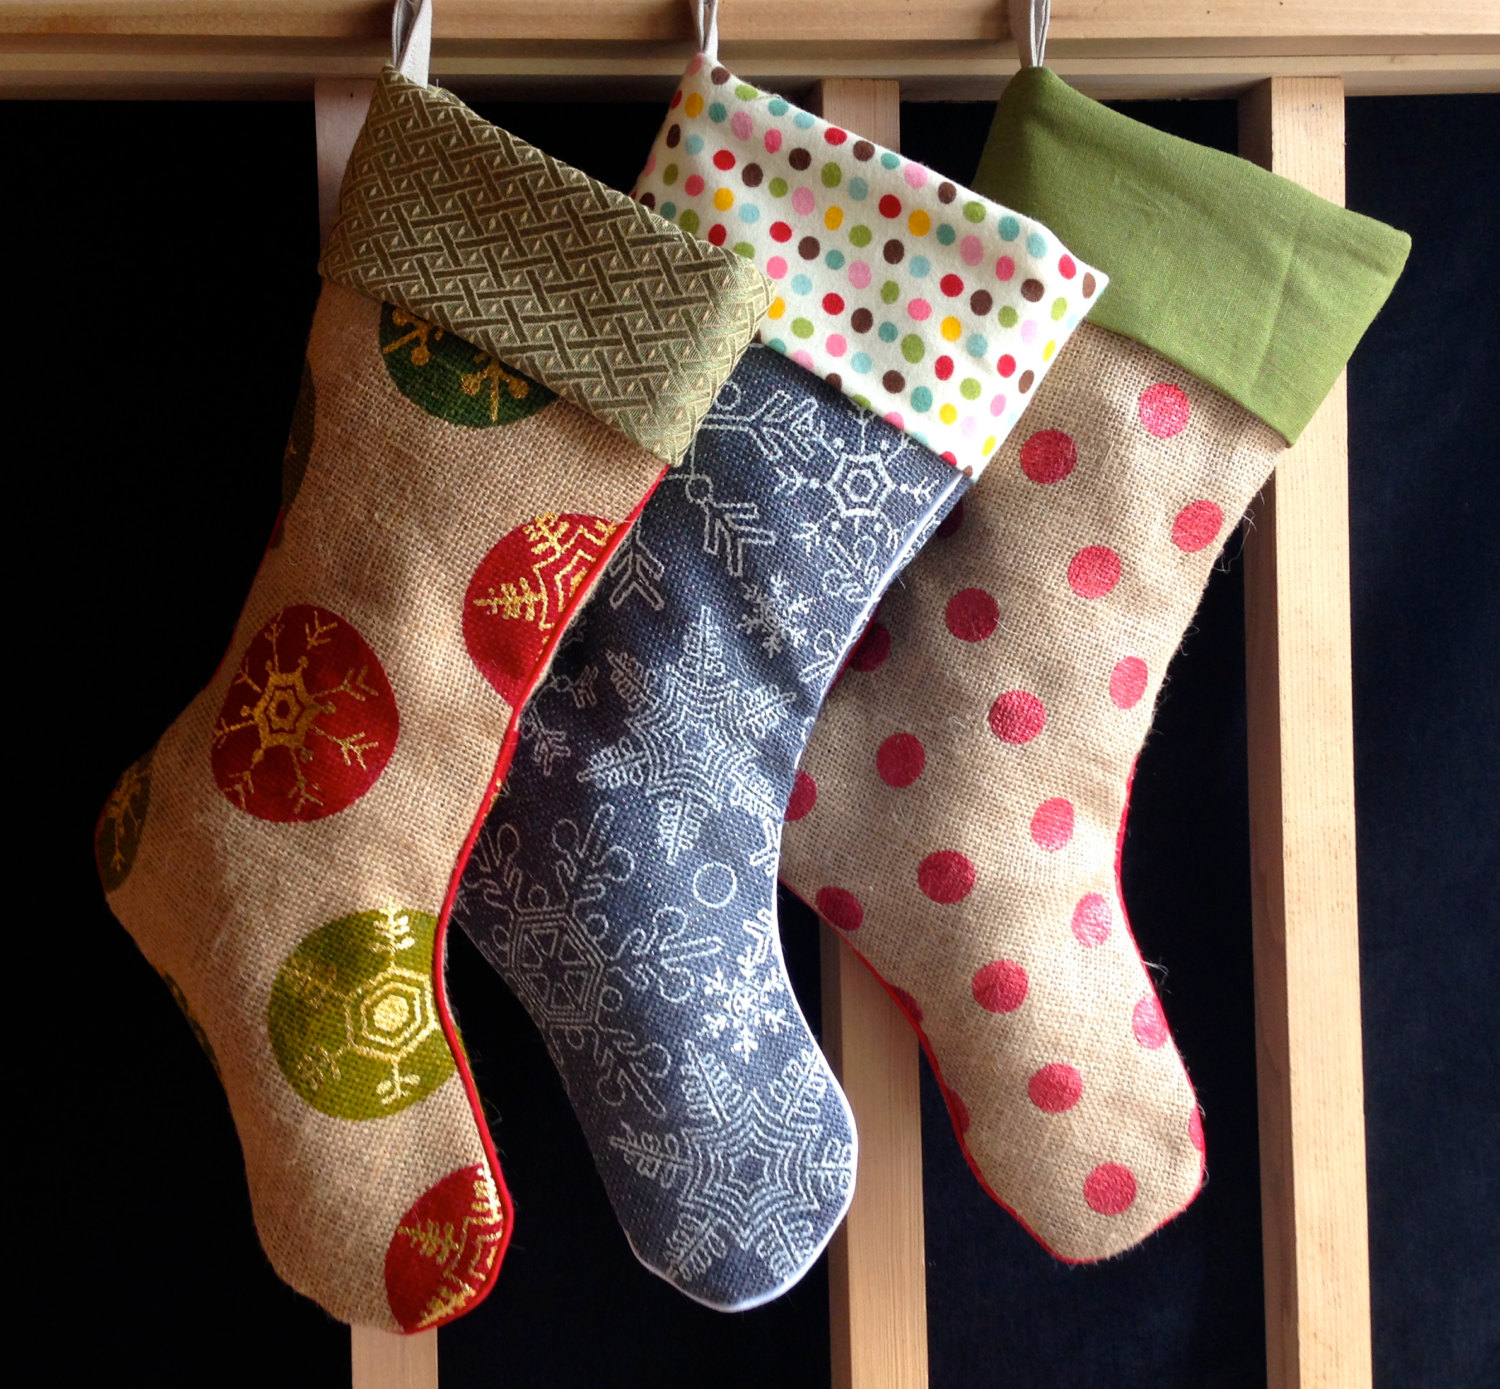 16-whimsical-handmade-christmas-stockings-to-decorate-your-home-with